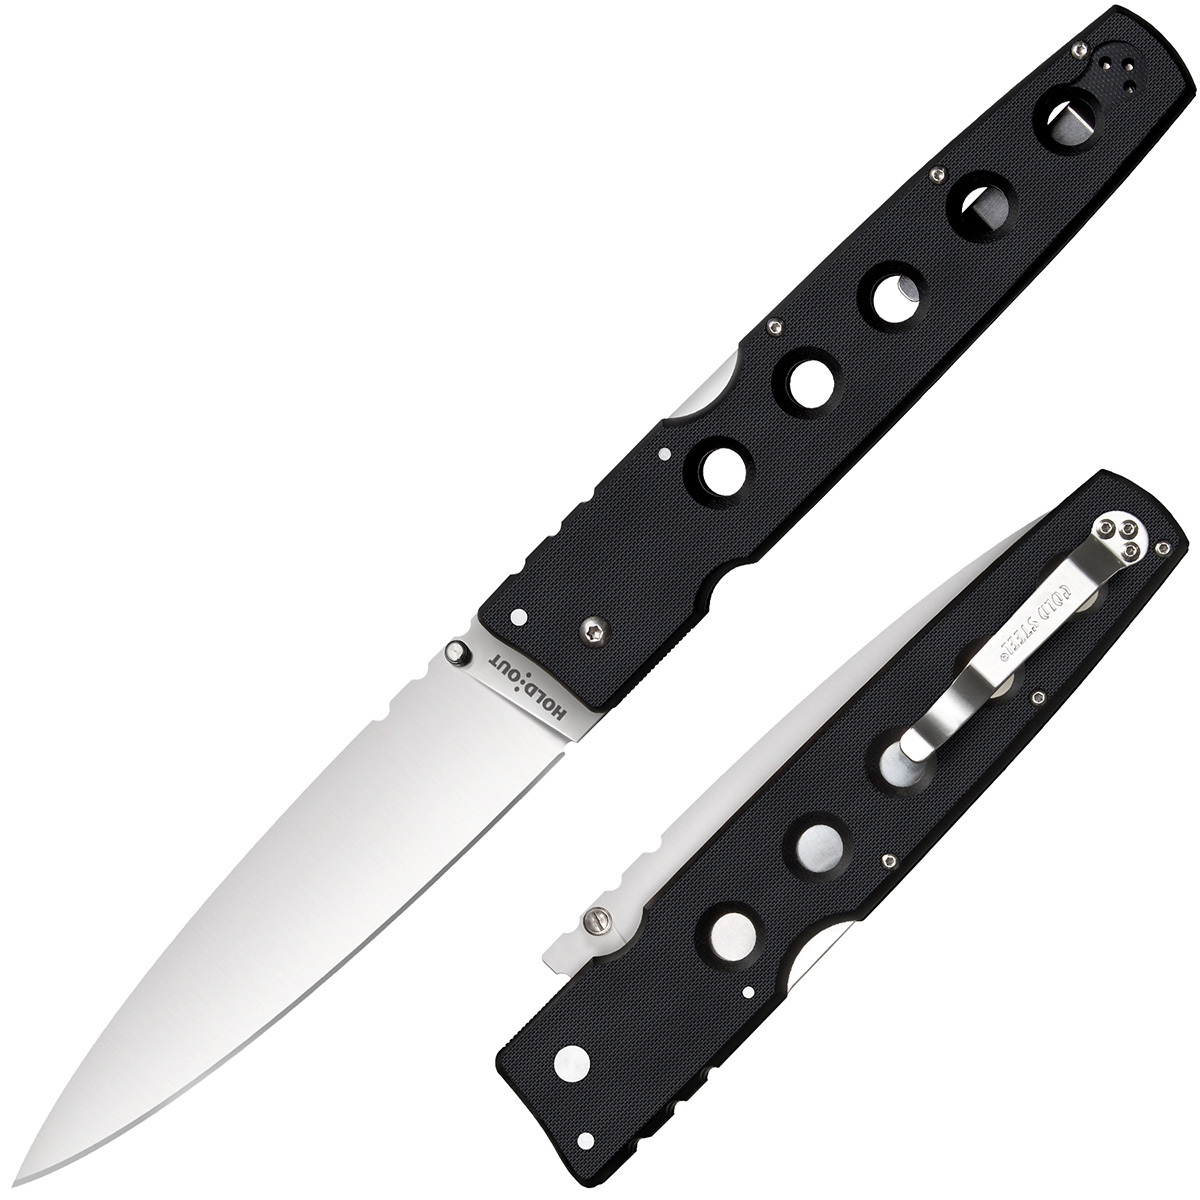   Cold Steel Hold Out 6,  S35VN,  G10, black